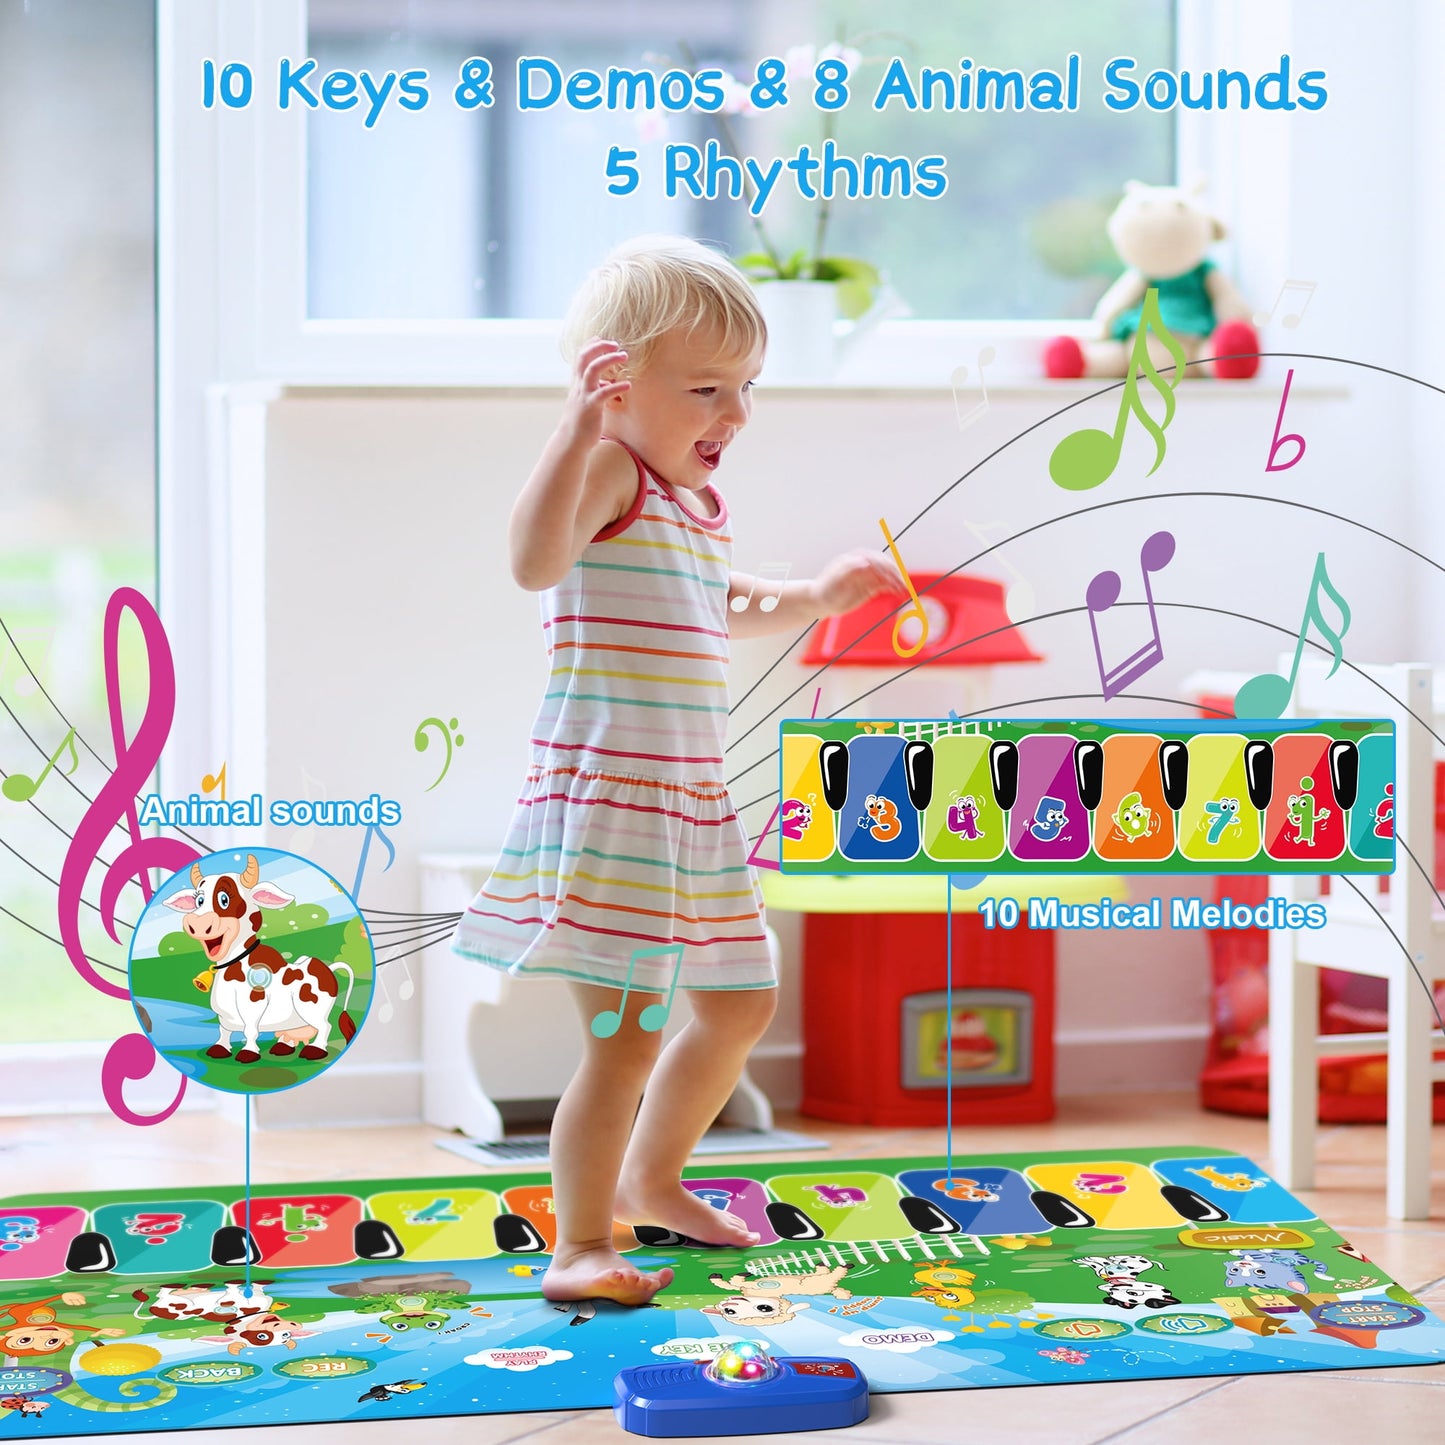 Baby Piano Dance Mat, Musical Toys for Kids, Rec&Replay Keyboard Playmats Christmas Gift for Toddlers Boys Girls Aged 1 2 3 4